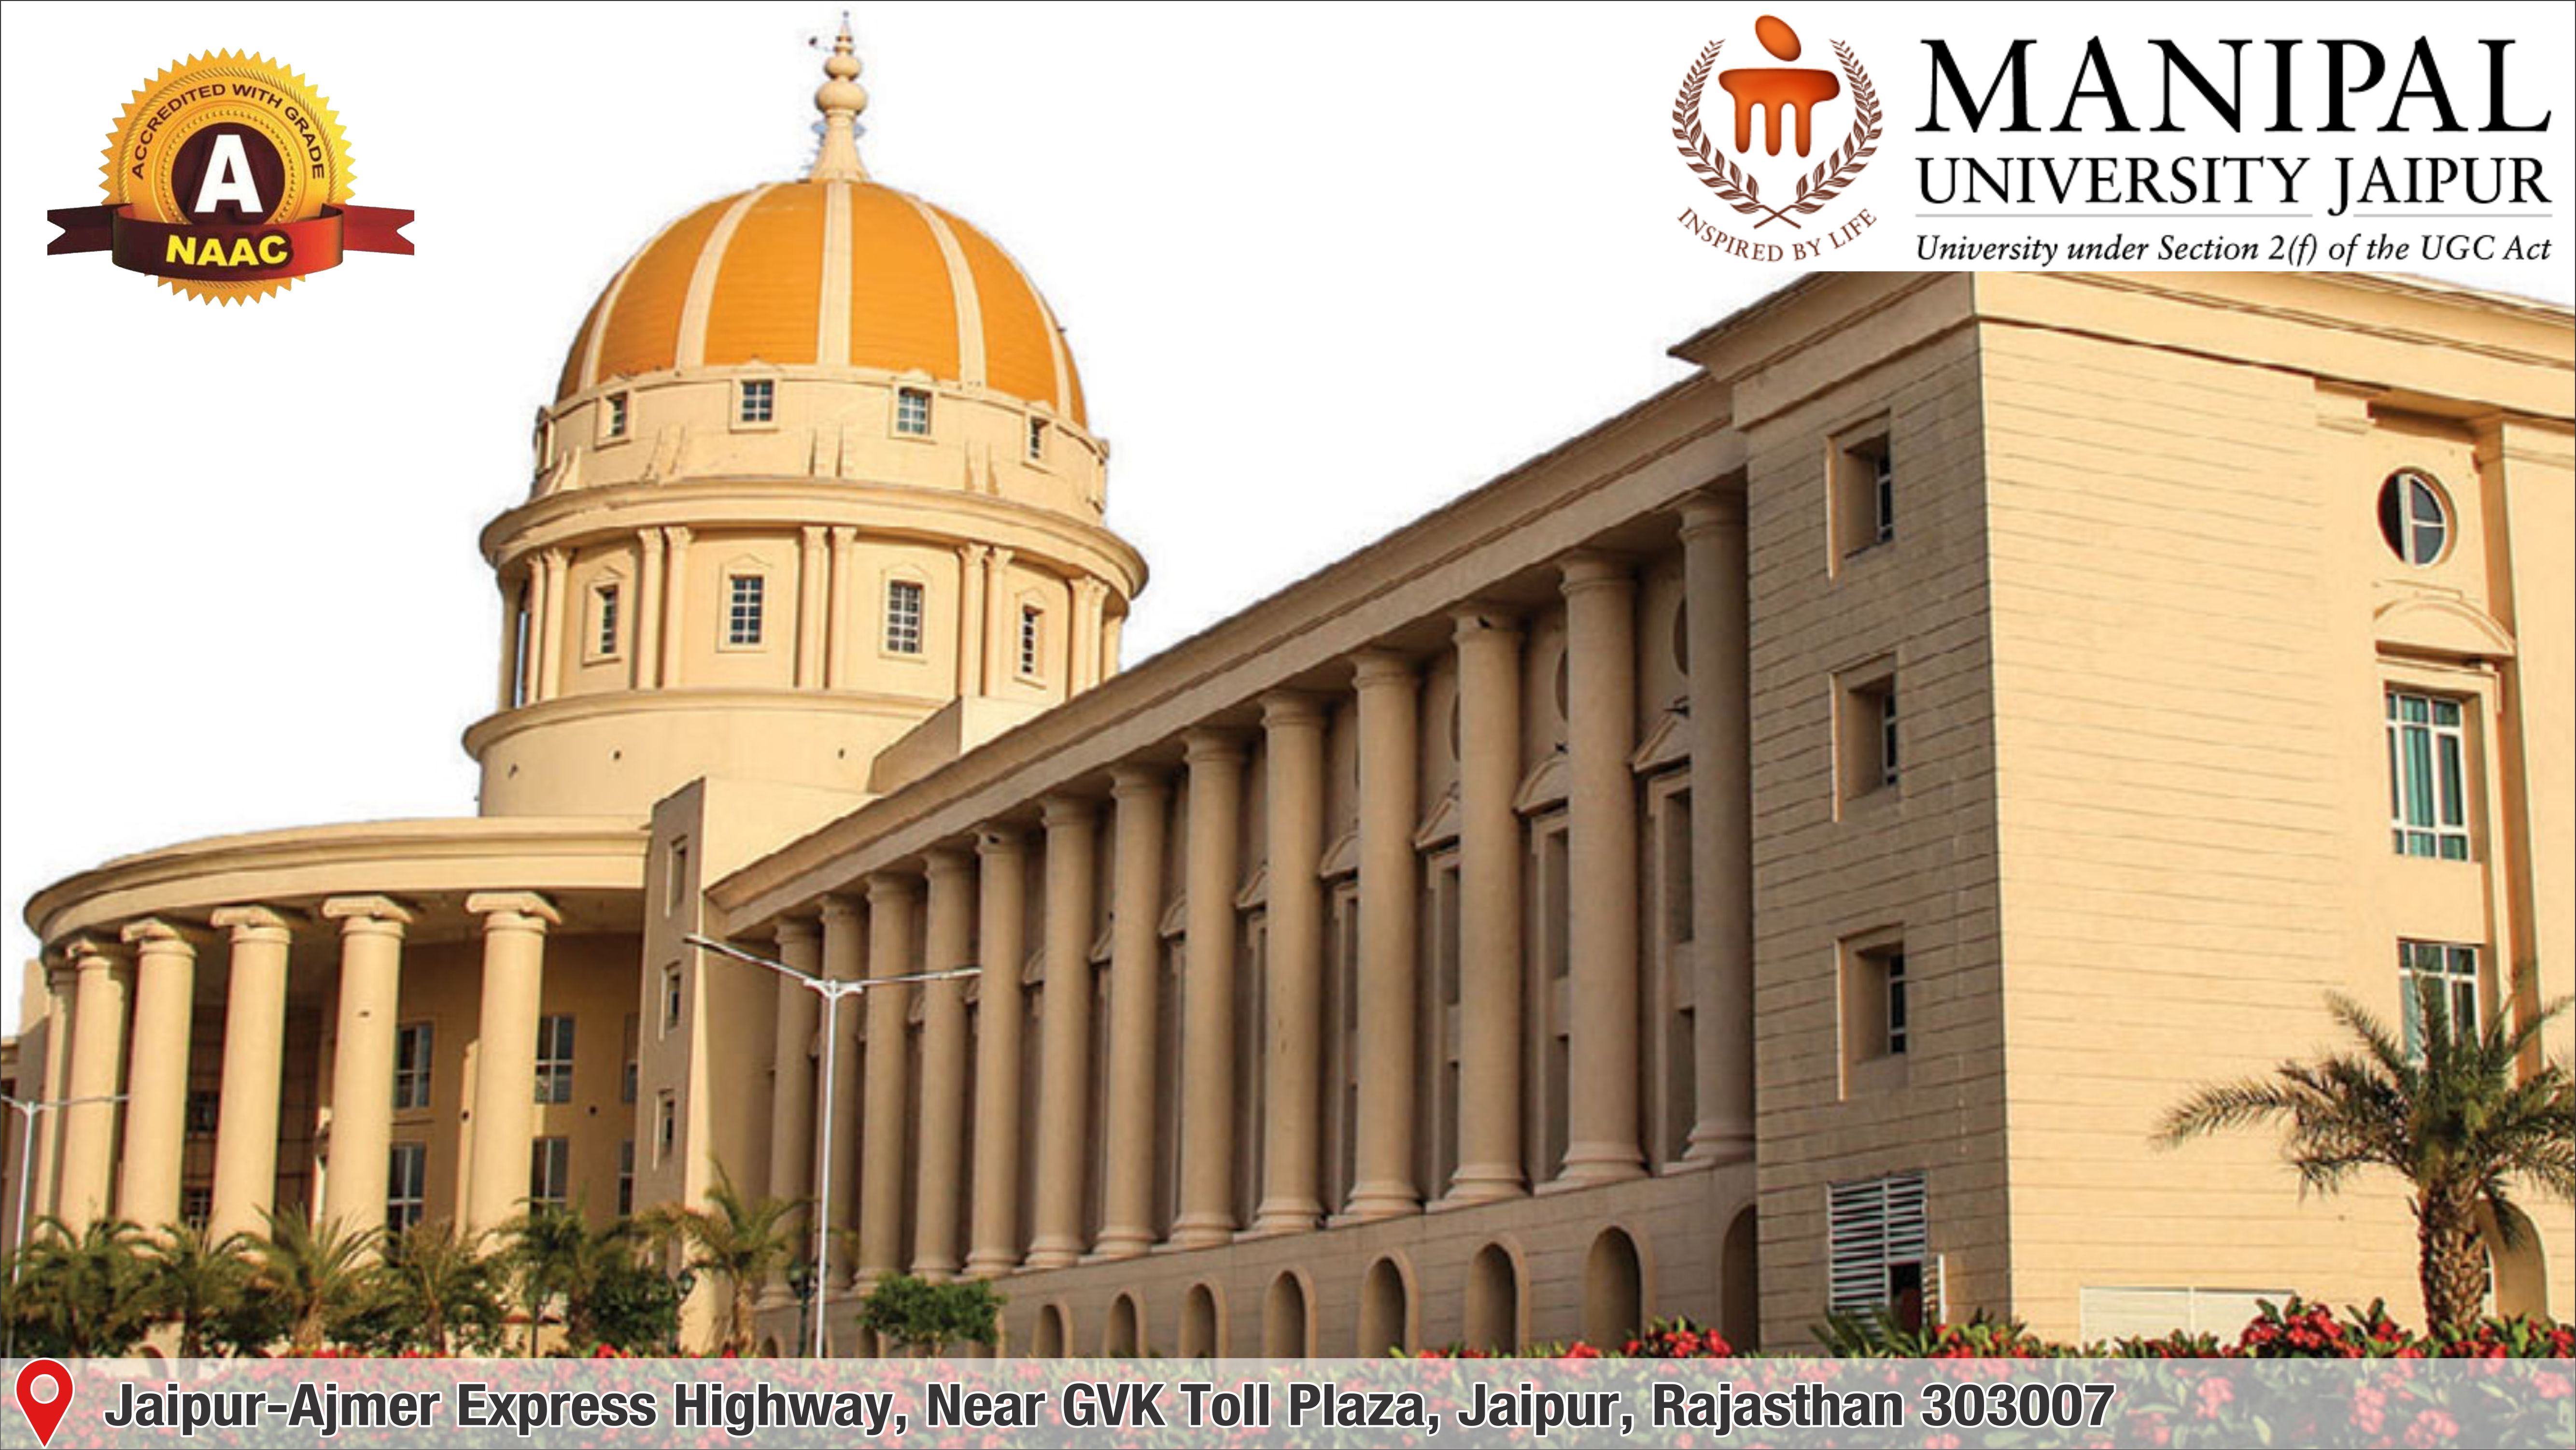 Out Side View of Manipal University, Jaipur